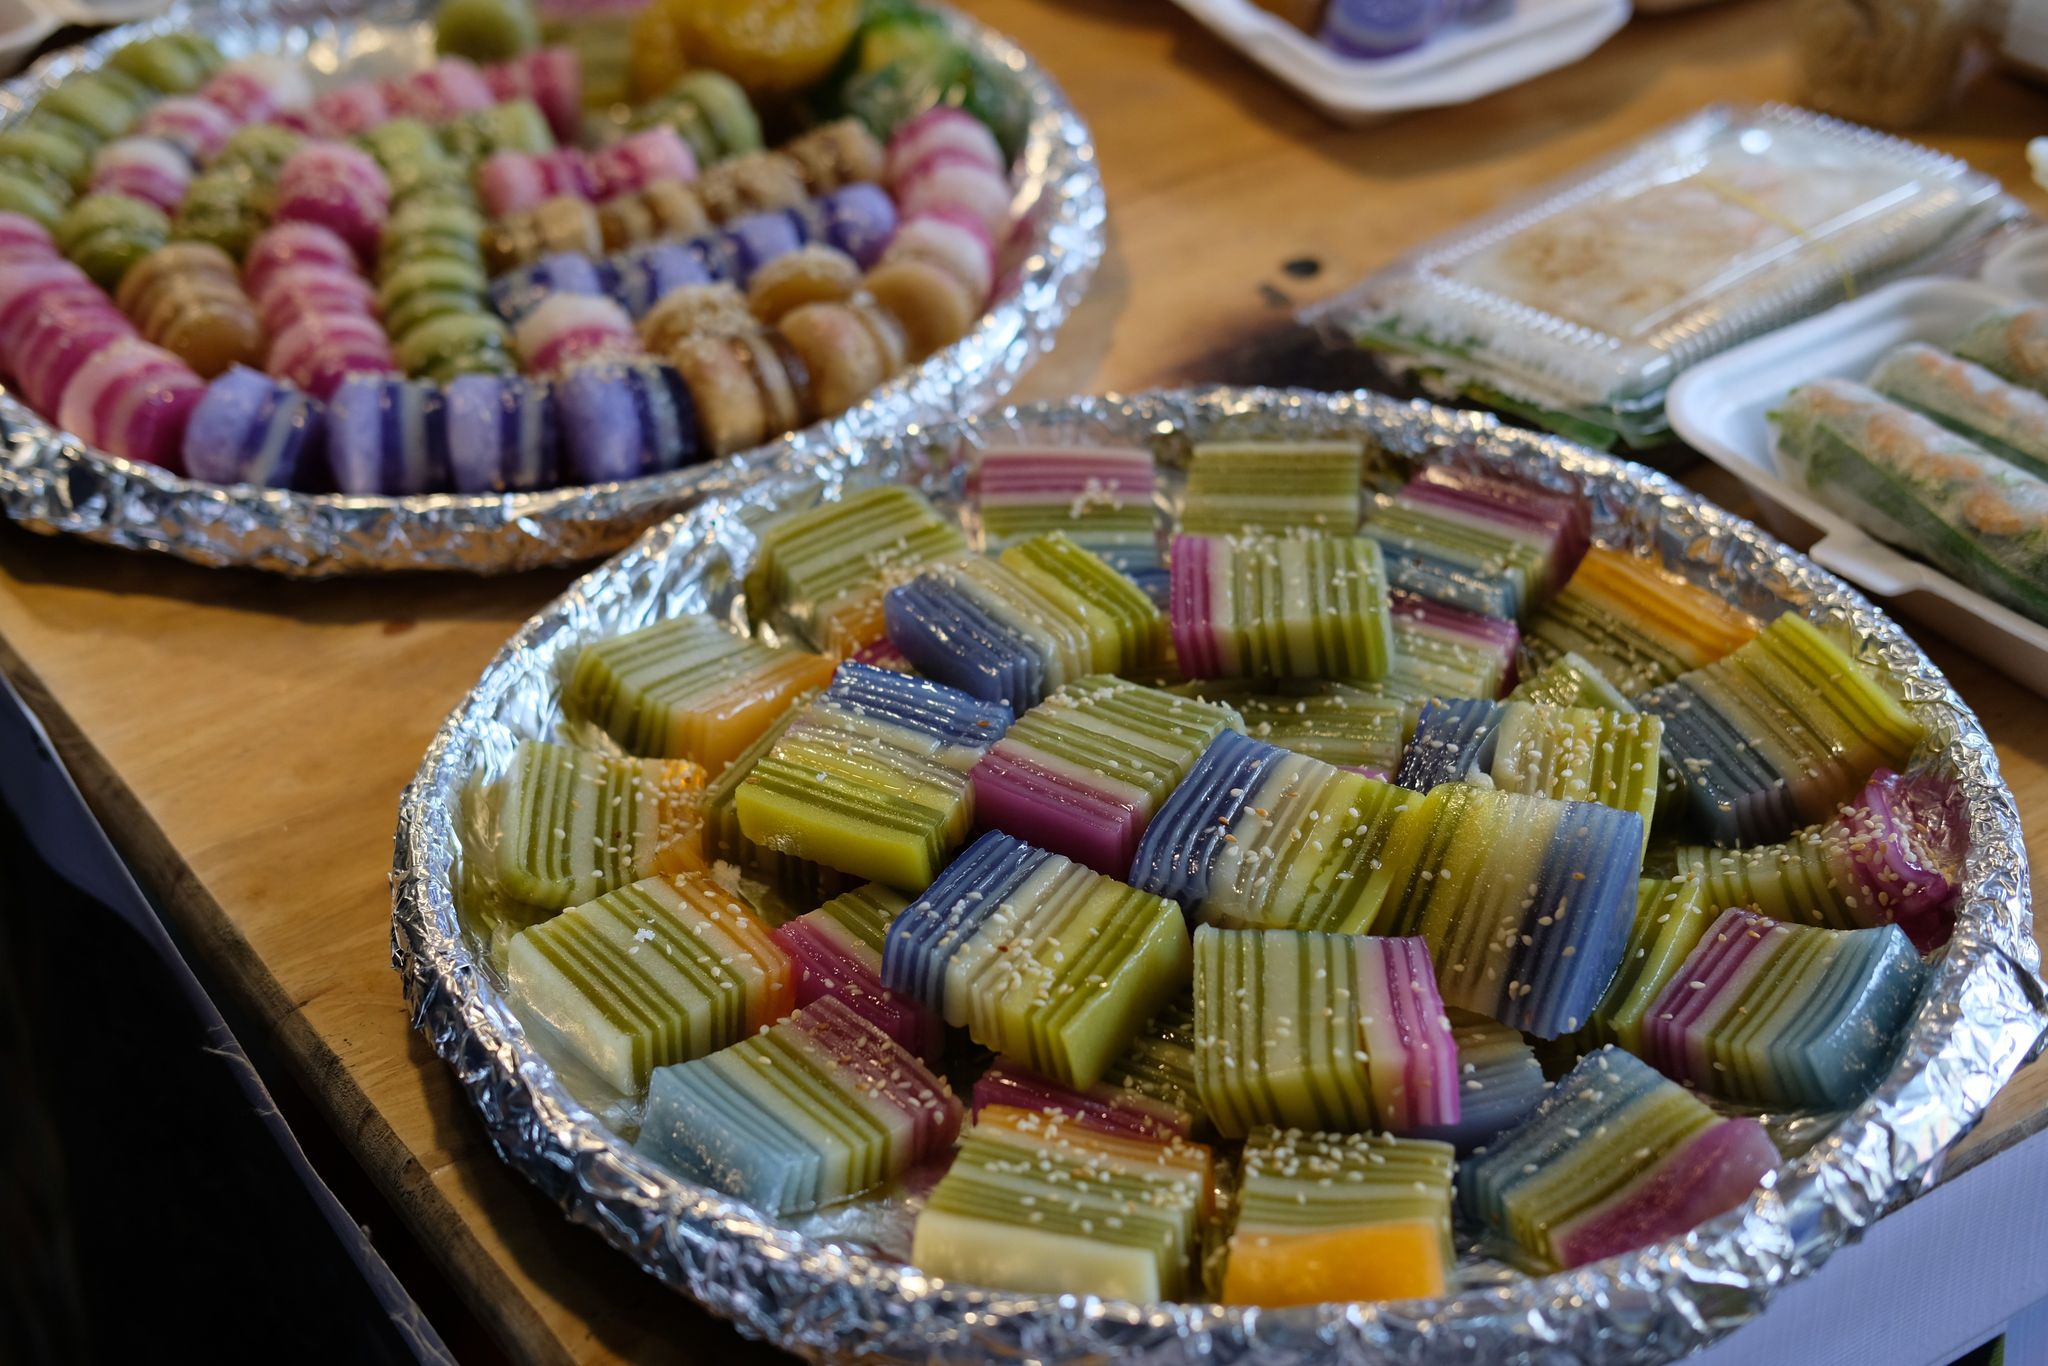 Desserts on display at a traditional snack festival in Can Tho City, Vietnam in April 2022. Photo: Photo: Tran Phuong / Tuoi Tre News